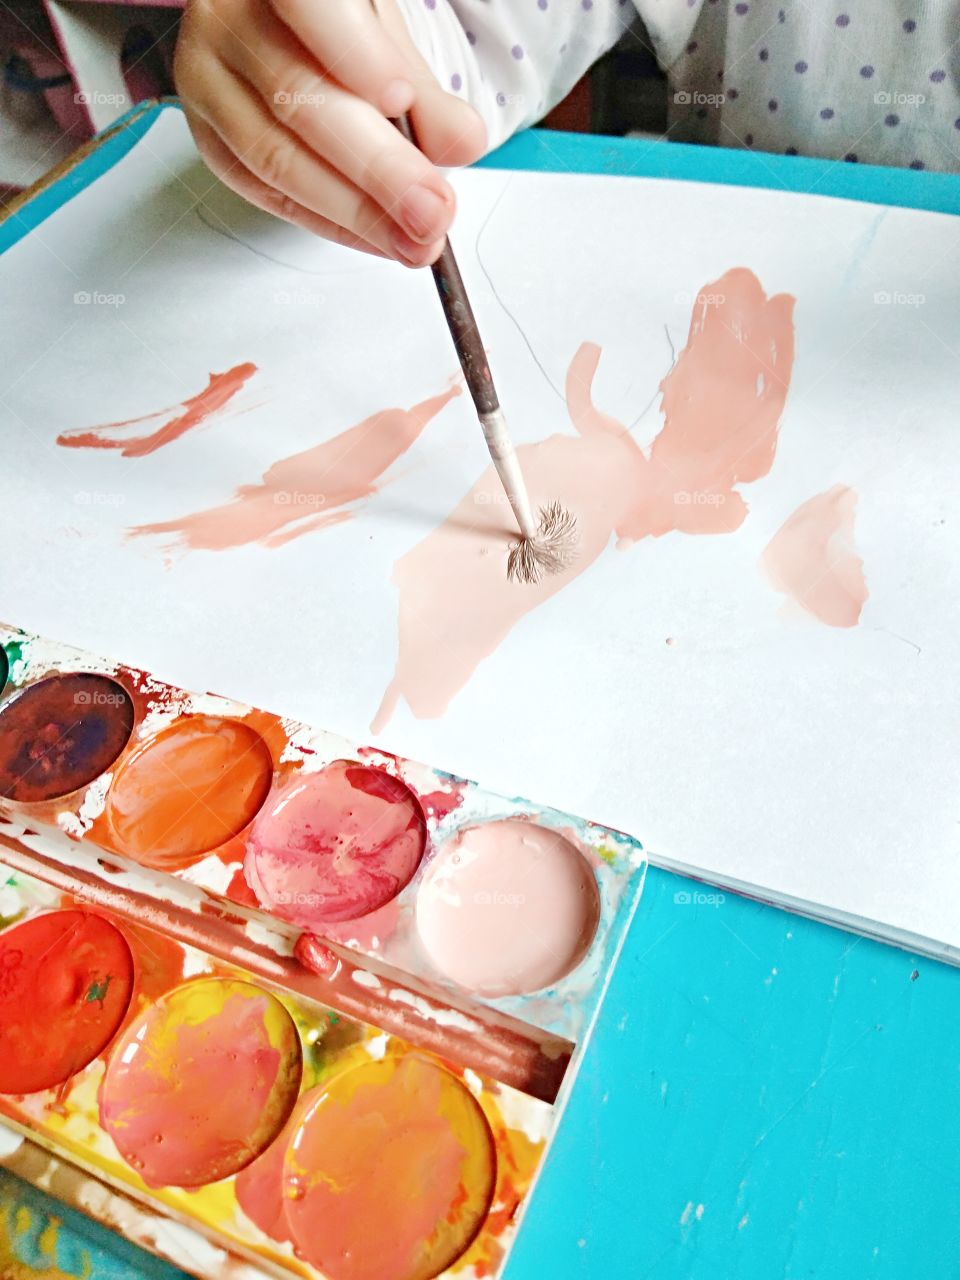 child's hand holds the brush and paints in the album with watercolors